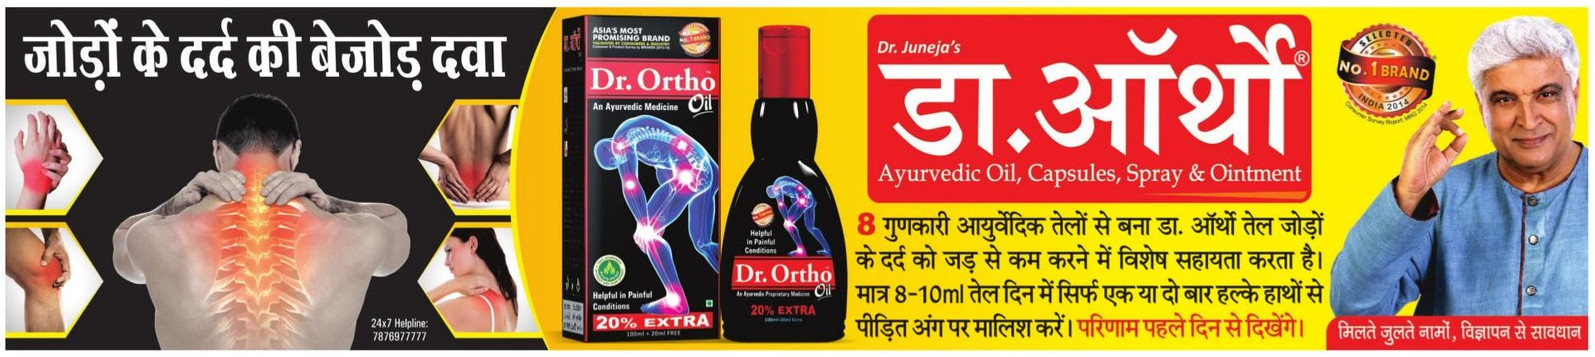 dr-ortho-oil-ayurvedic-oil-capsules-spray-and-ointment-ad-amar-ujala-delhi-12-06-2021